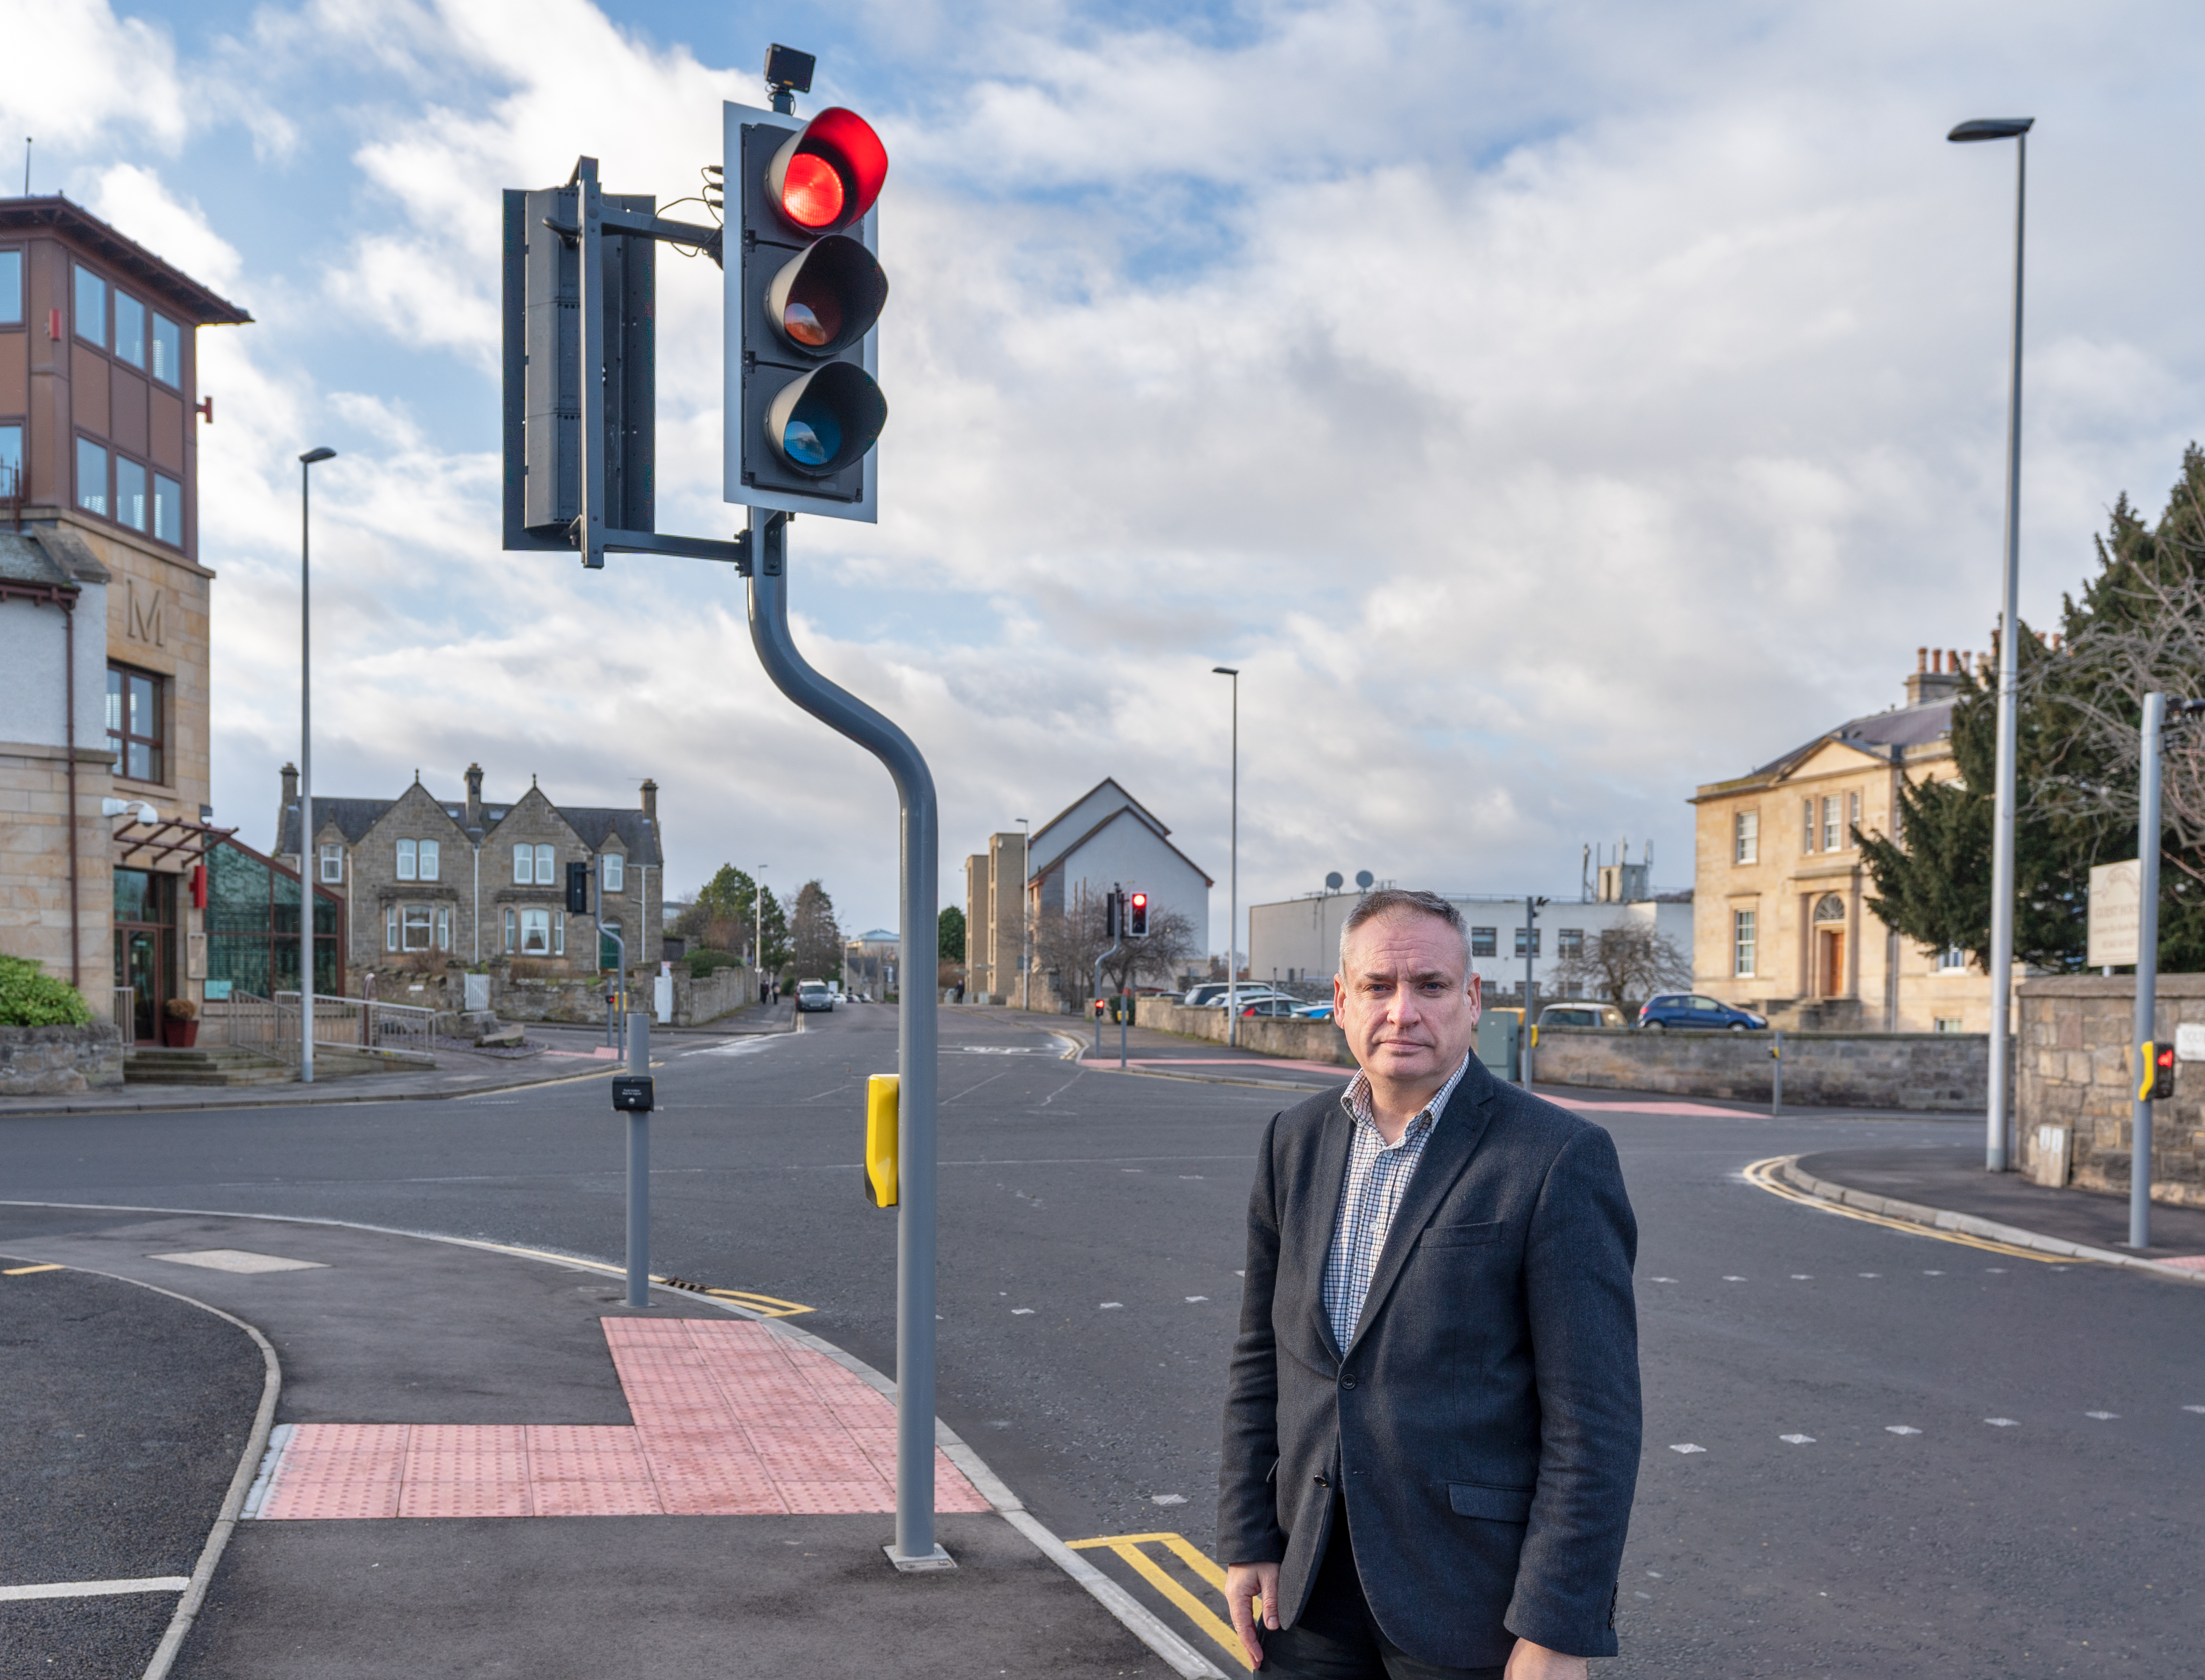 Richard Lochhead at the traffic light  junction of South Street and A941 Northfield Terrace, Elgin, Moray, Scotland.